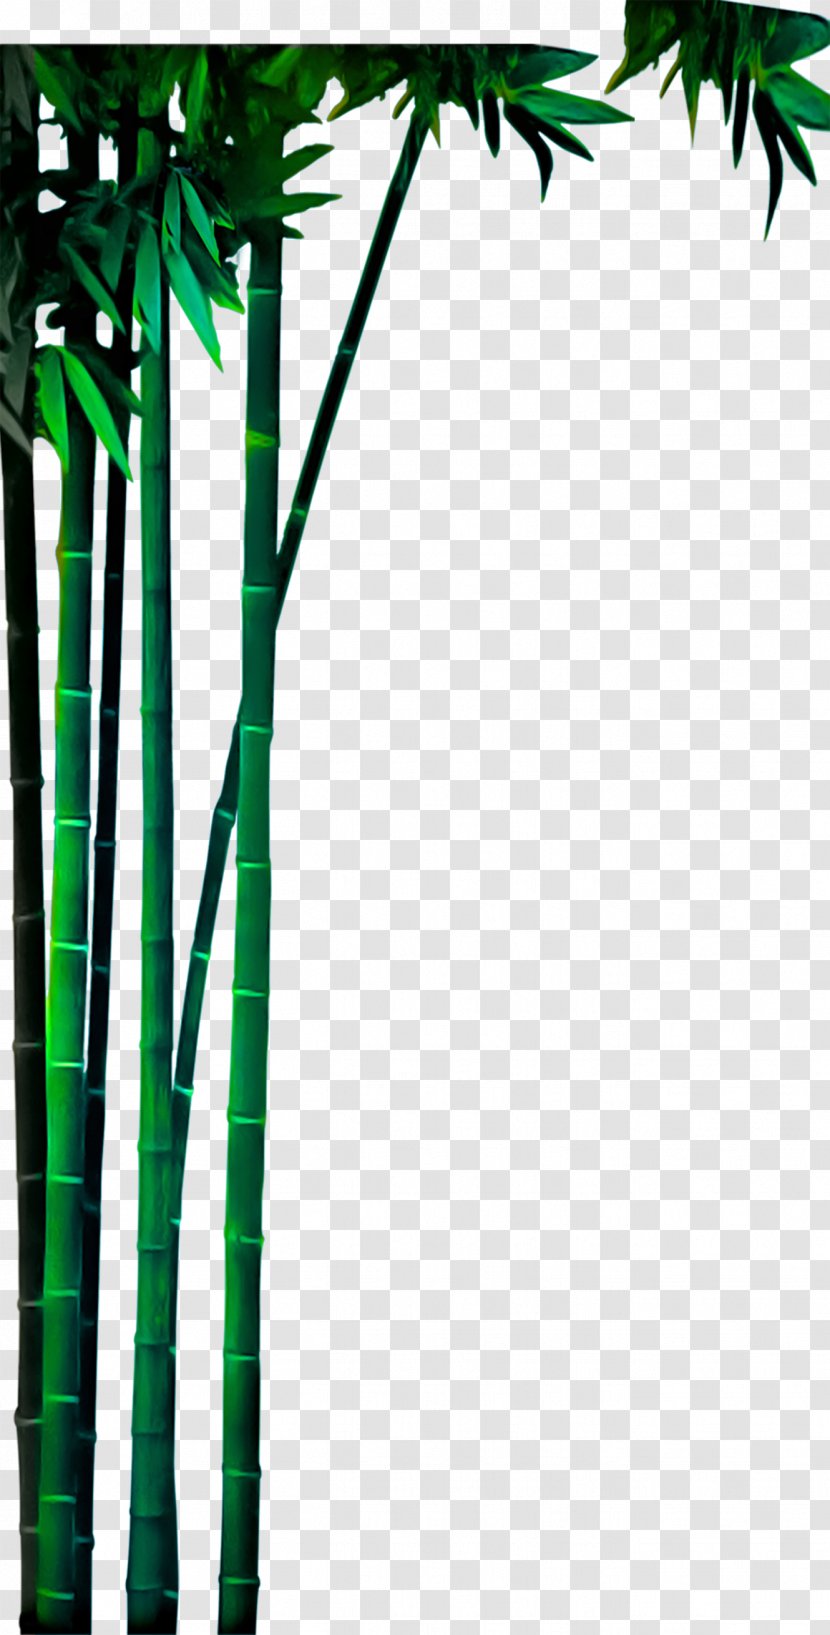 Bamboo Bamboe Green - Twig - Real Material Transparent PNG